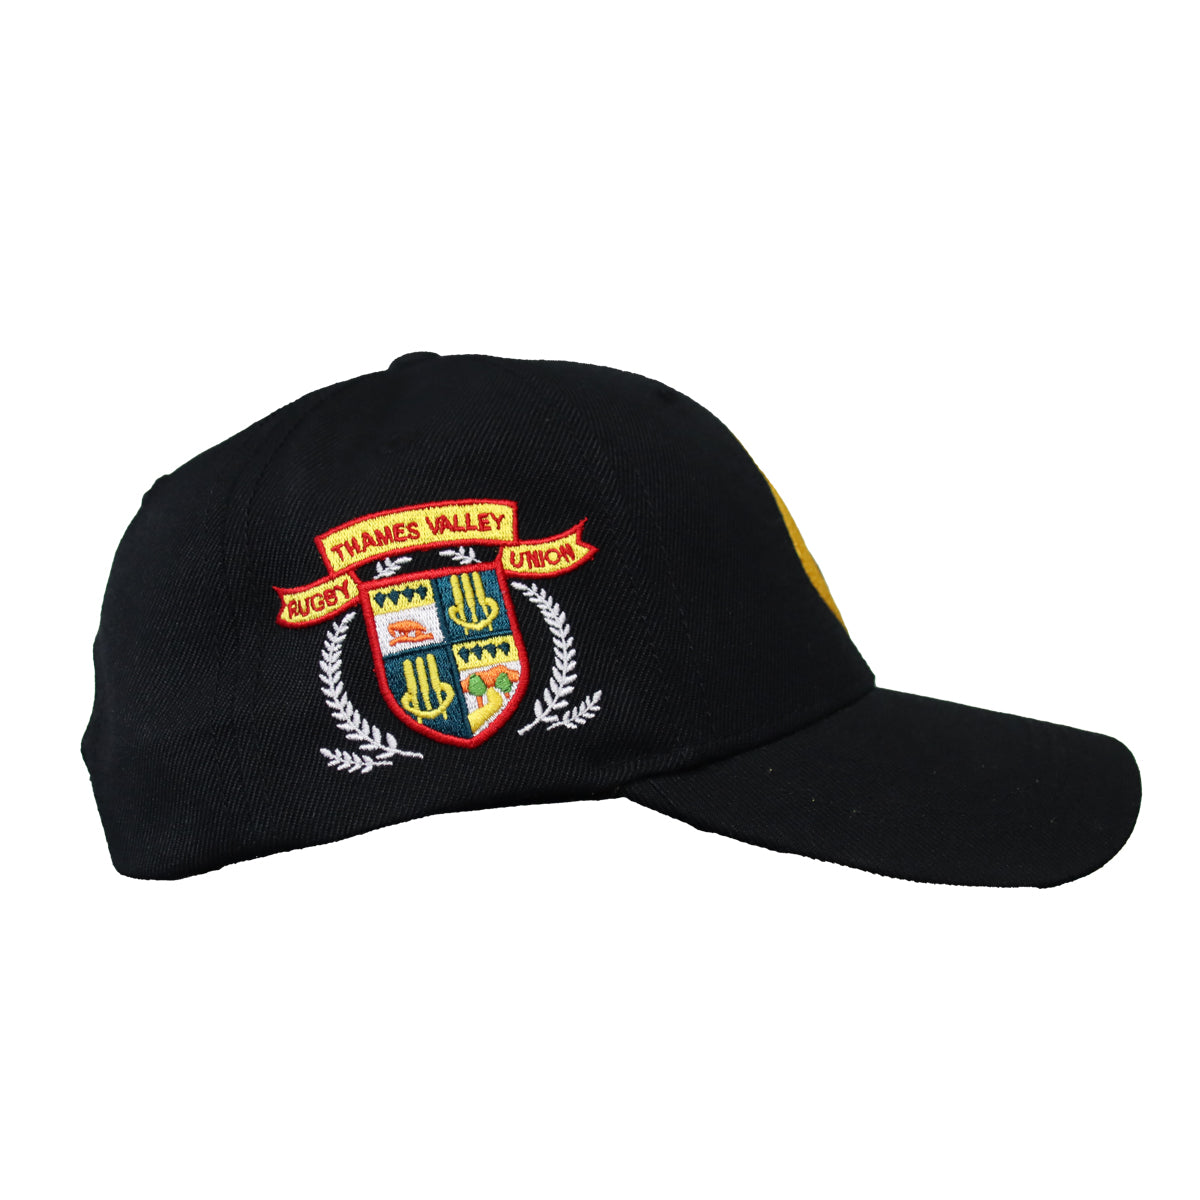 Thames Valley Rugby Union Media Cap